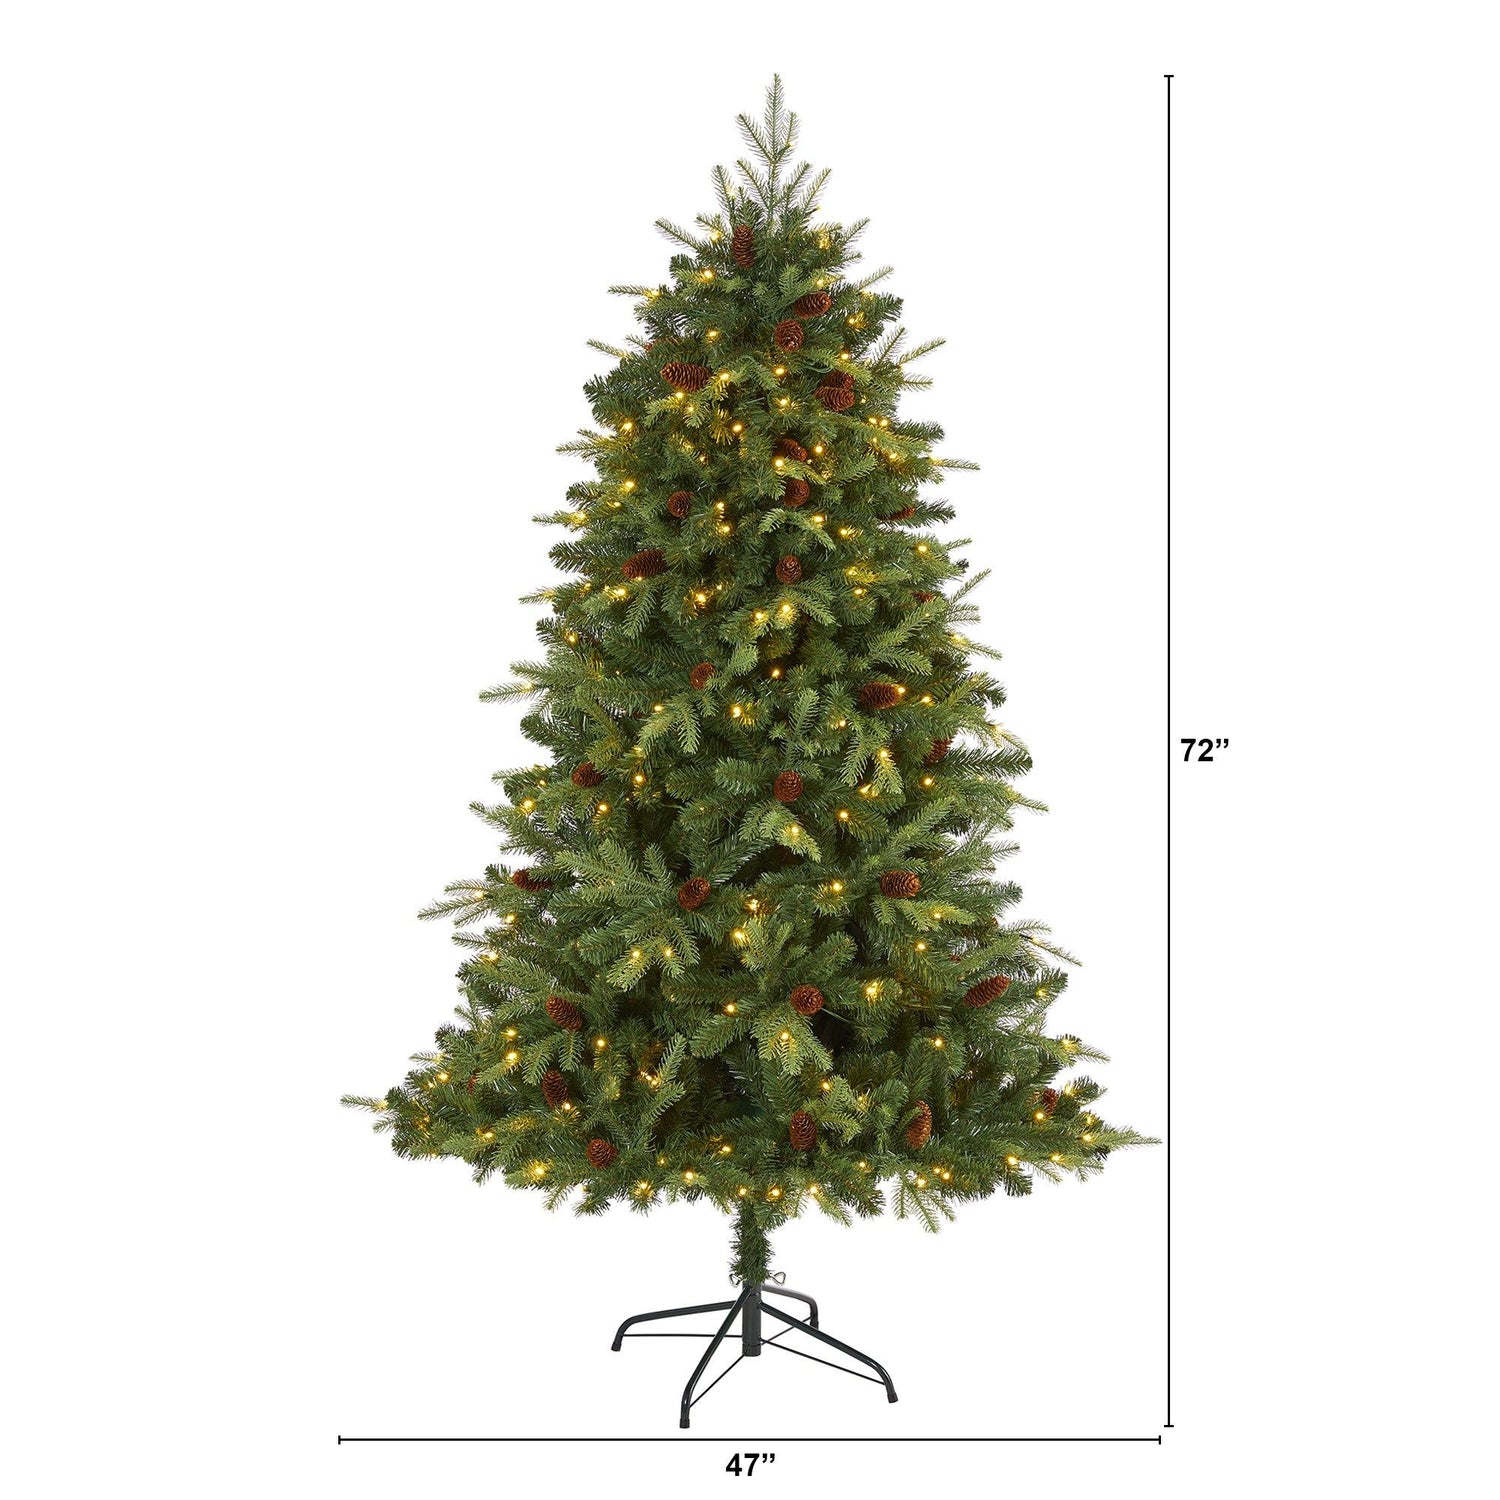 6’ Wellington Spruce “Natural Look” Artificial Christmas Tree with 300 Clear LED Lights and Pine Cones